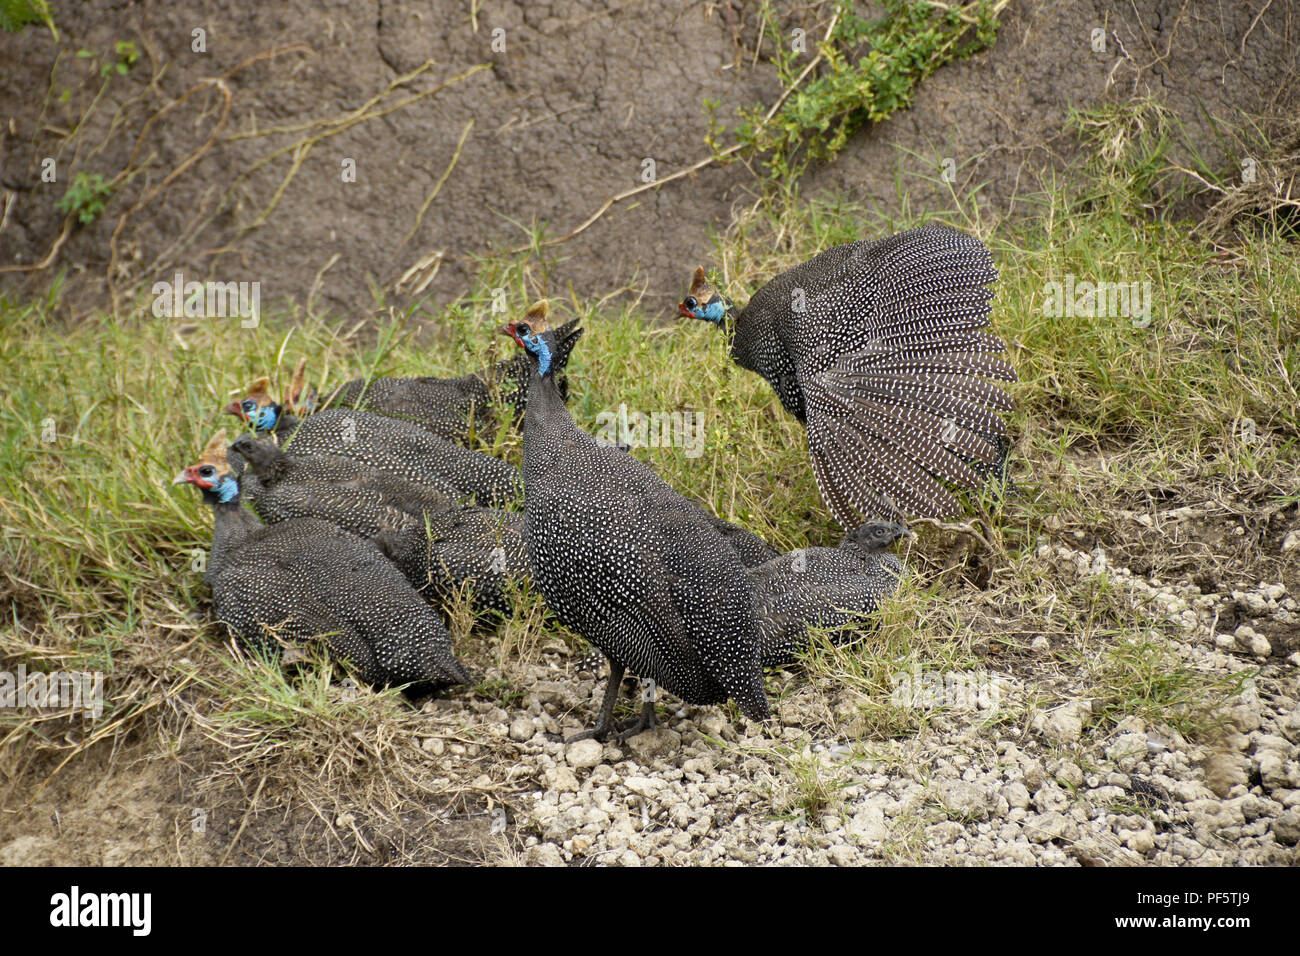 Helemeted guineafowl with chicks resting in small ravine, Masai Mara Game Reserve, Kenya Stock Photo